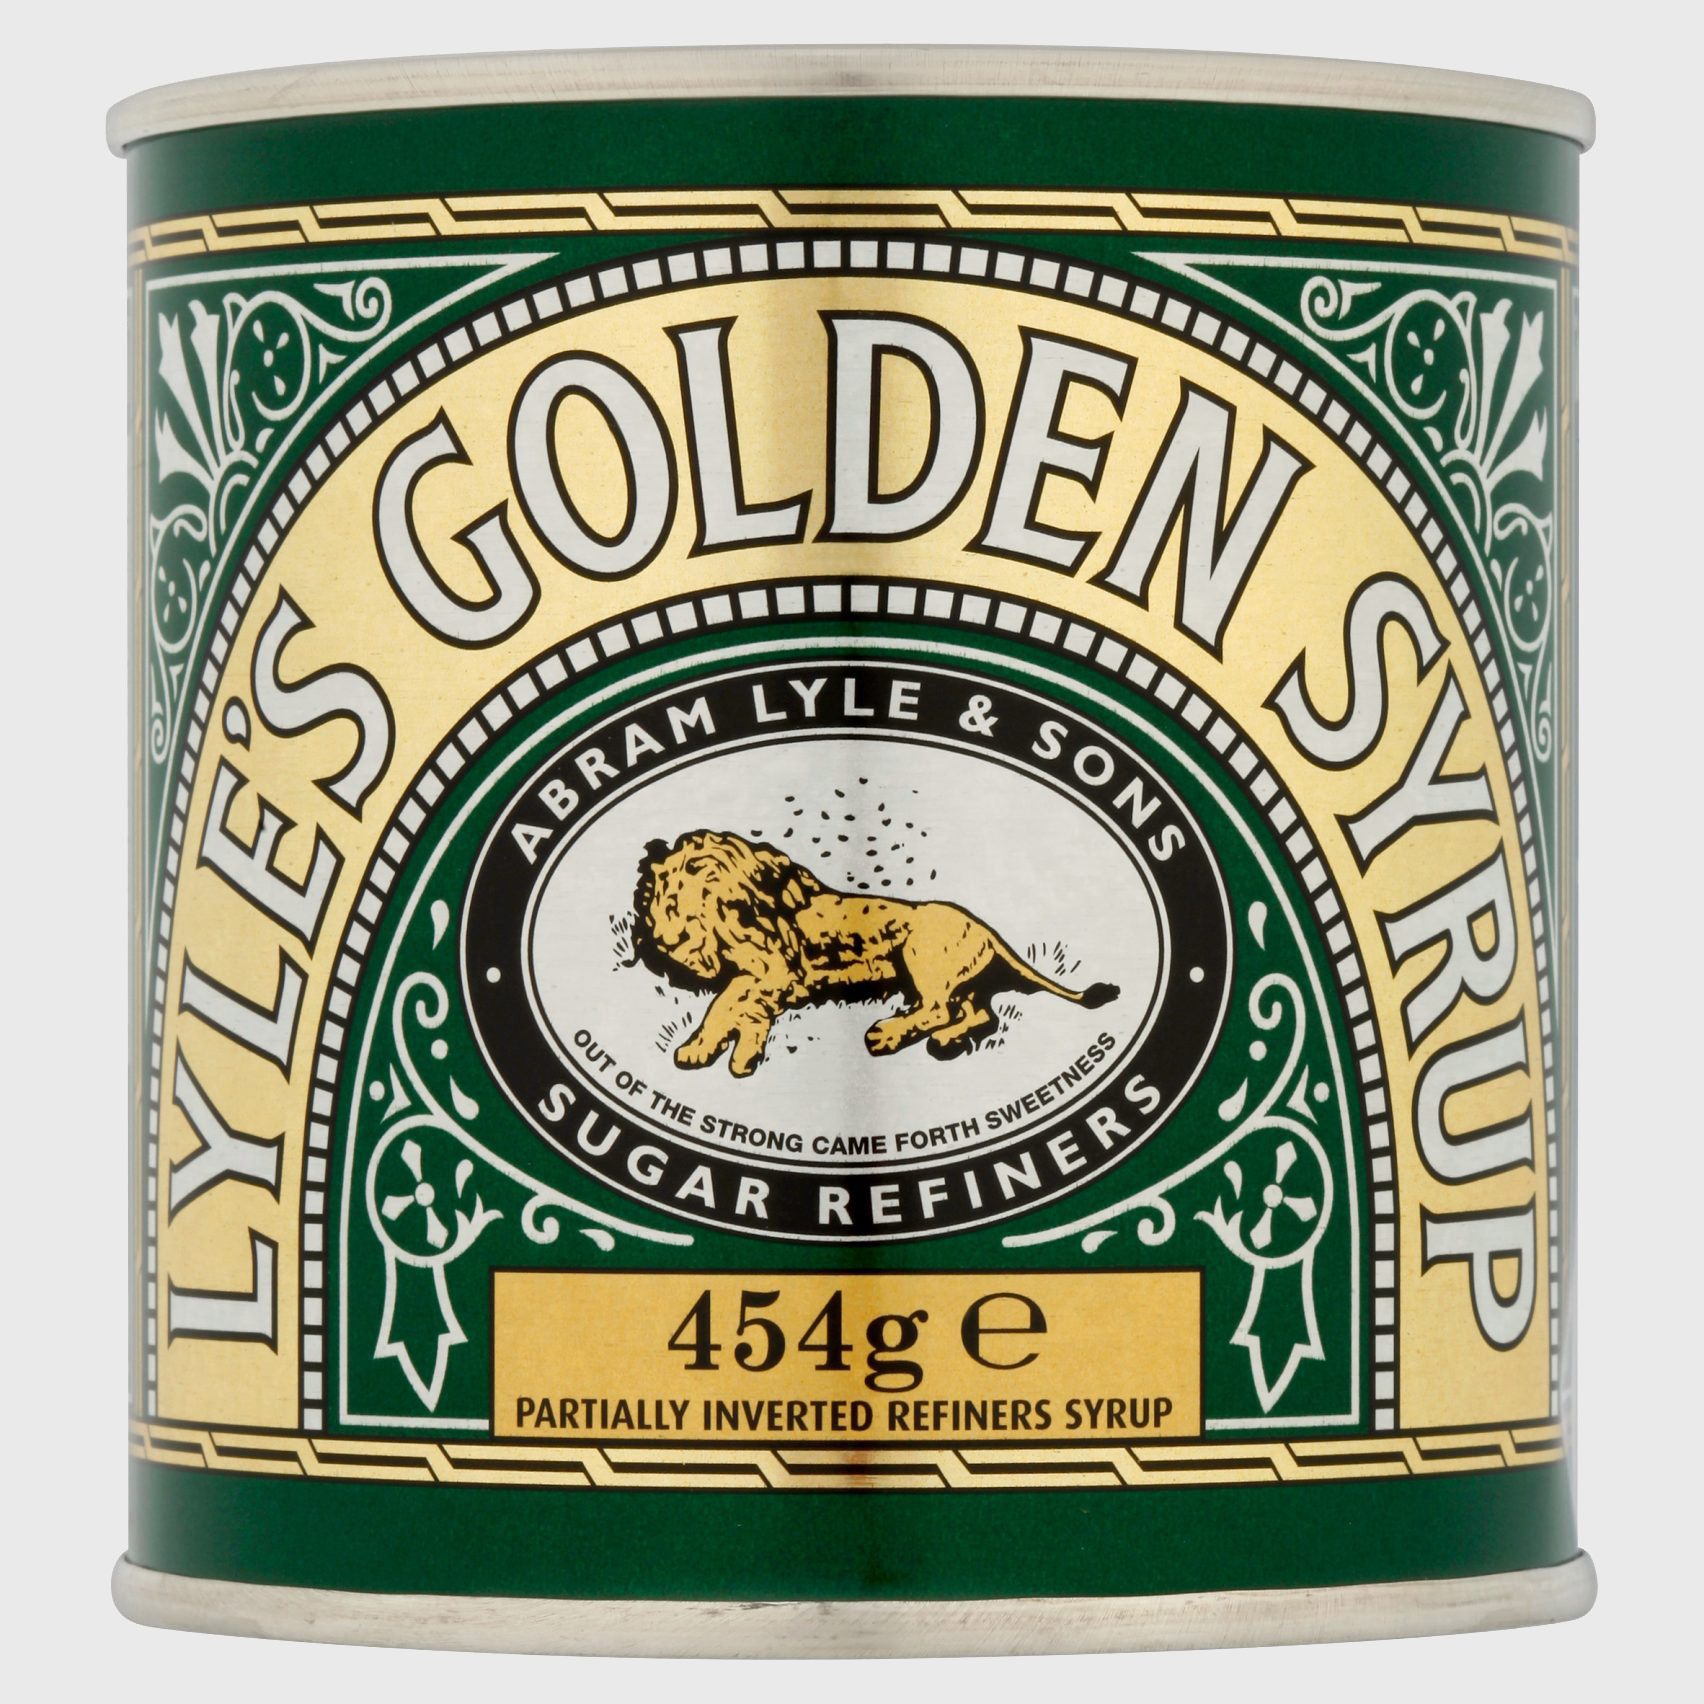 Original tin of Tate and Lyle's Golden Syrup rebrand